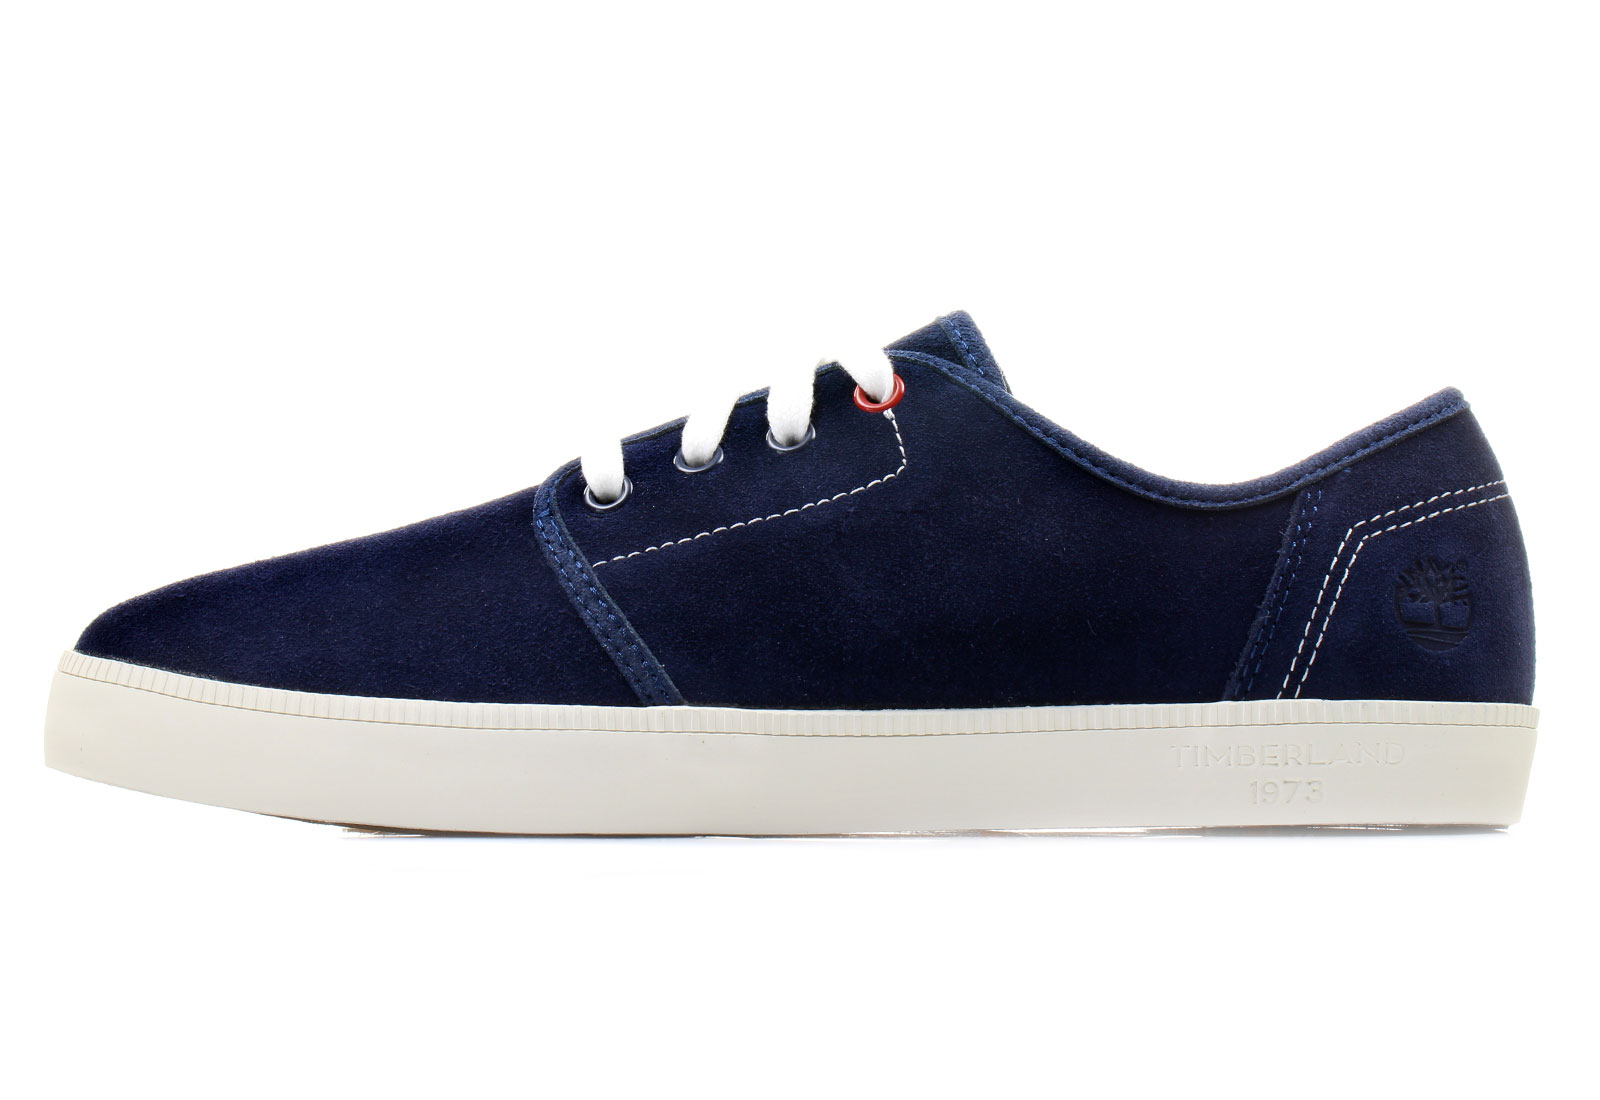 Timberland Shoes - Newport Bay - a154m-nvy - Online shop for sneakers ...